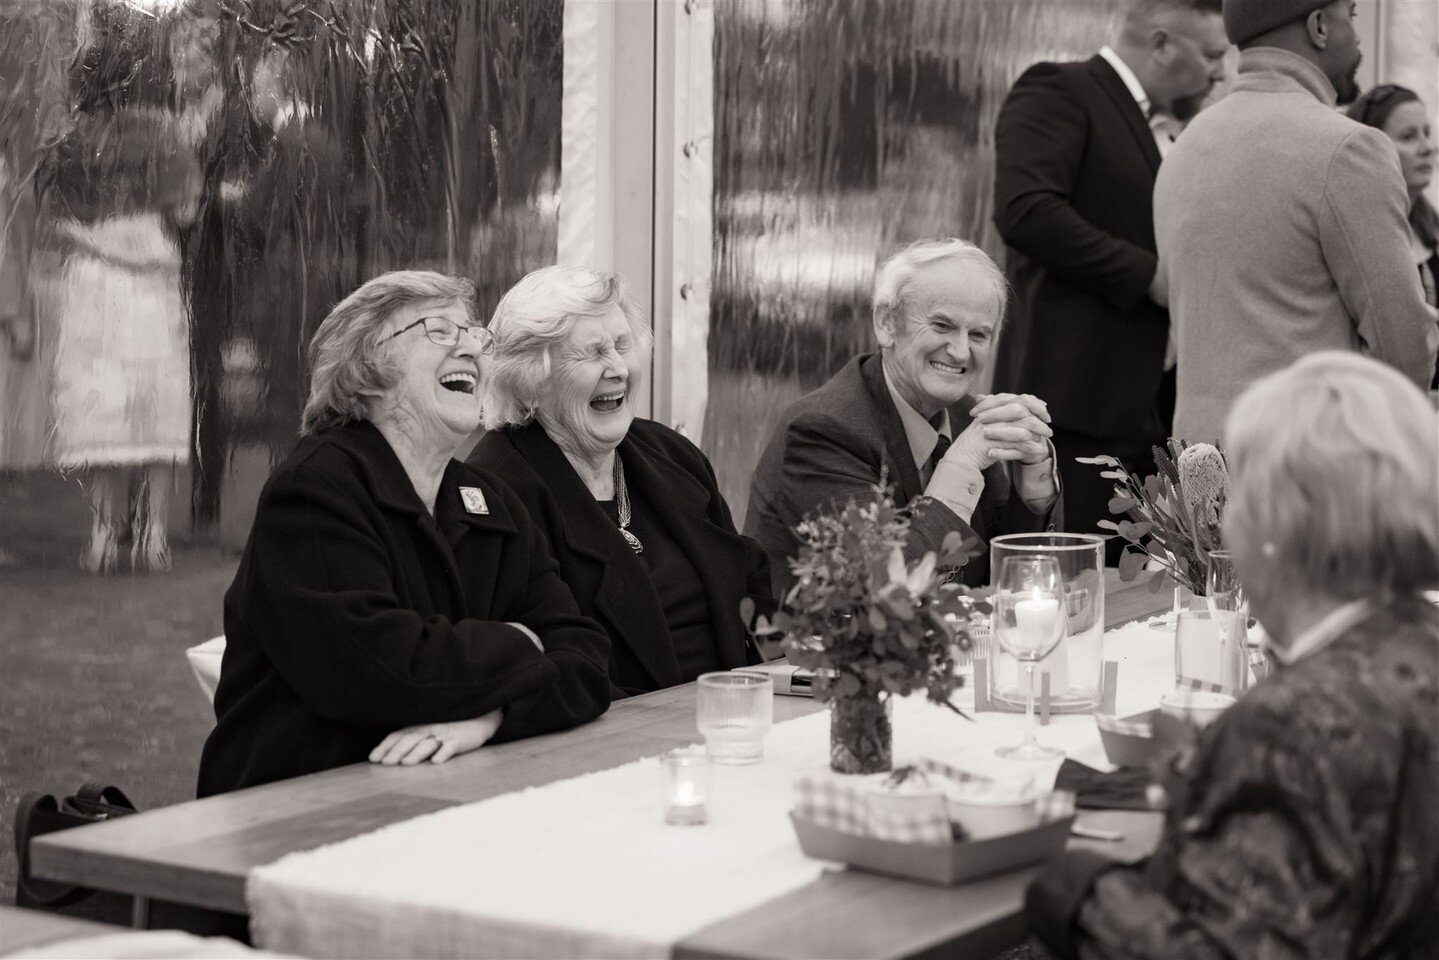 Double the laughter and double the fun! ⁠
⁠
These lovely ladies are enjoying prime seats in our clear-span marquee, celebrating Michelle and Eyas' wedding with all the joy and laughter! 🎉😄 ⁠
⁠
Featuring our Noojee tables and Loch bench seats.⁠
⁠
📷